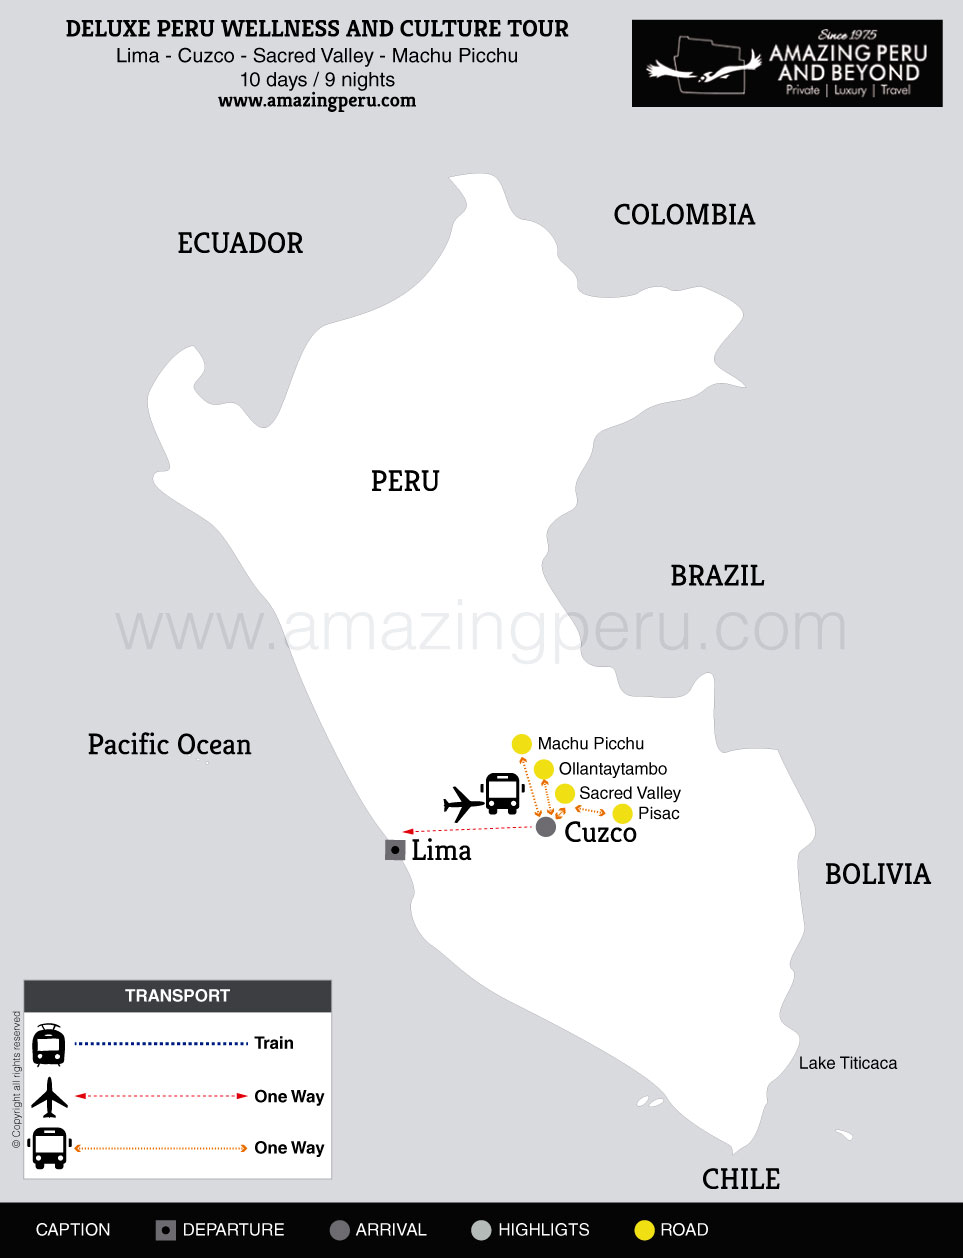 2022 Deluxe Peru Wellness and Culture Tour - 10 days / 9 nights.